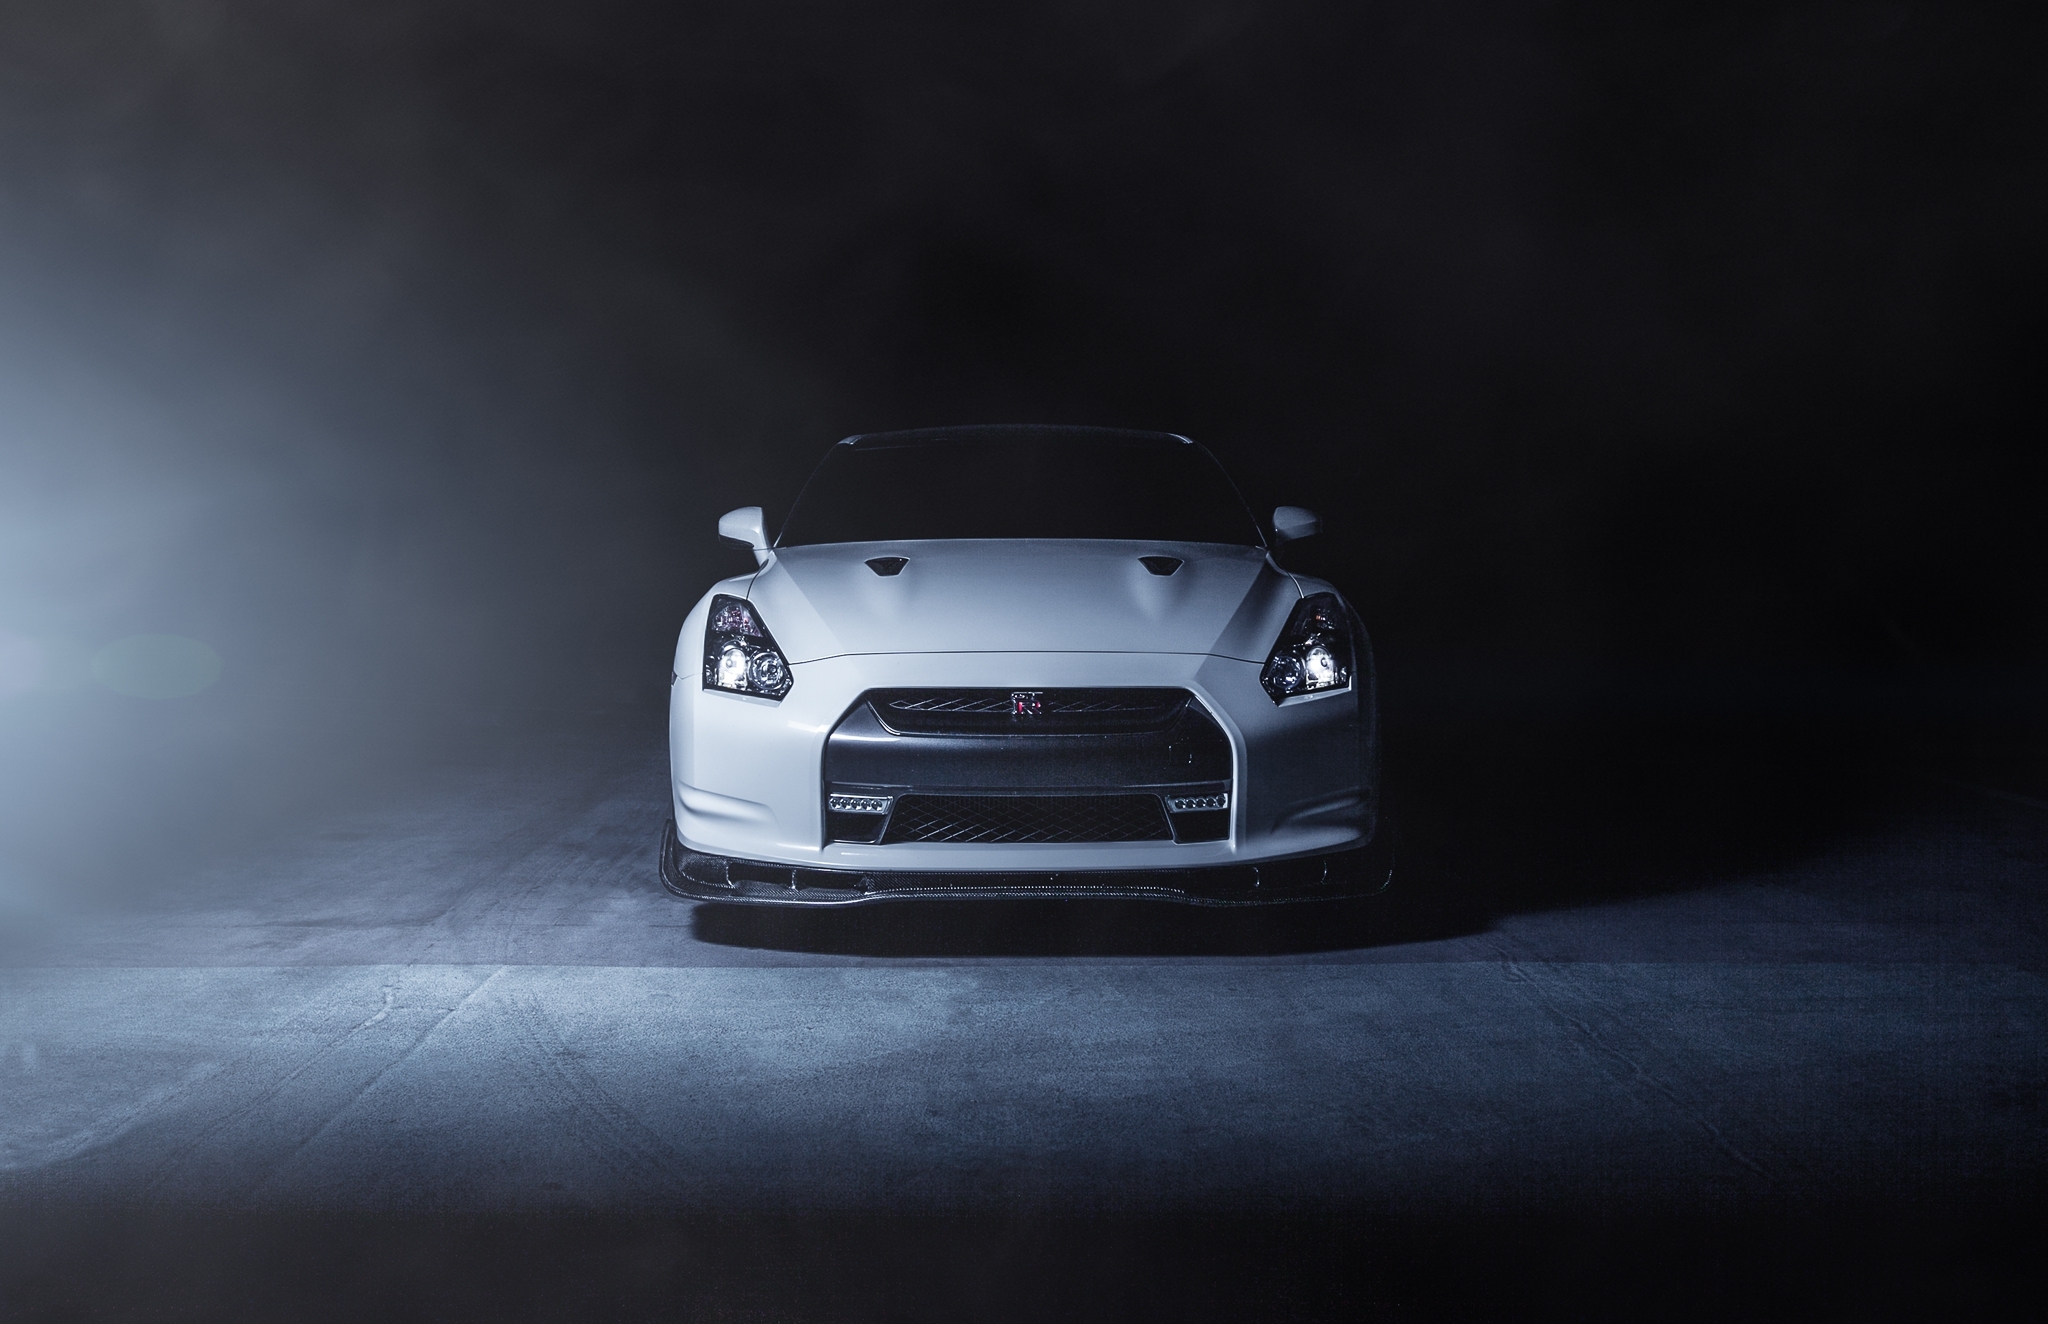 nissan, cars, white, smoke, gt r, front end, limber, r35 for android